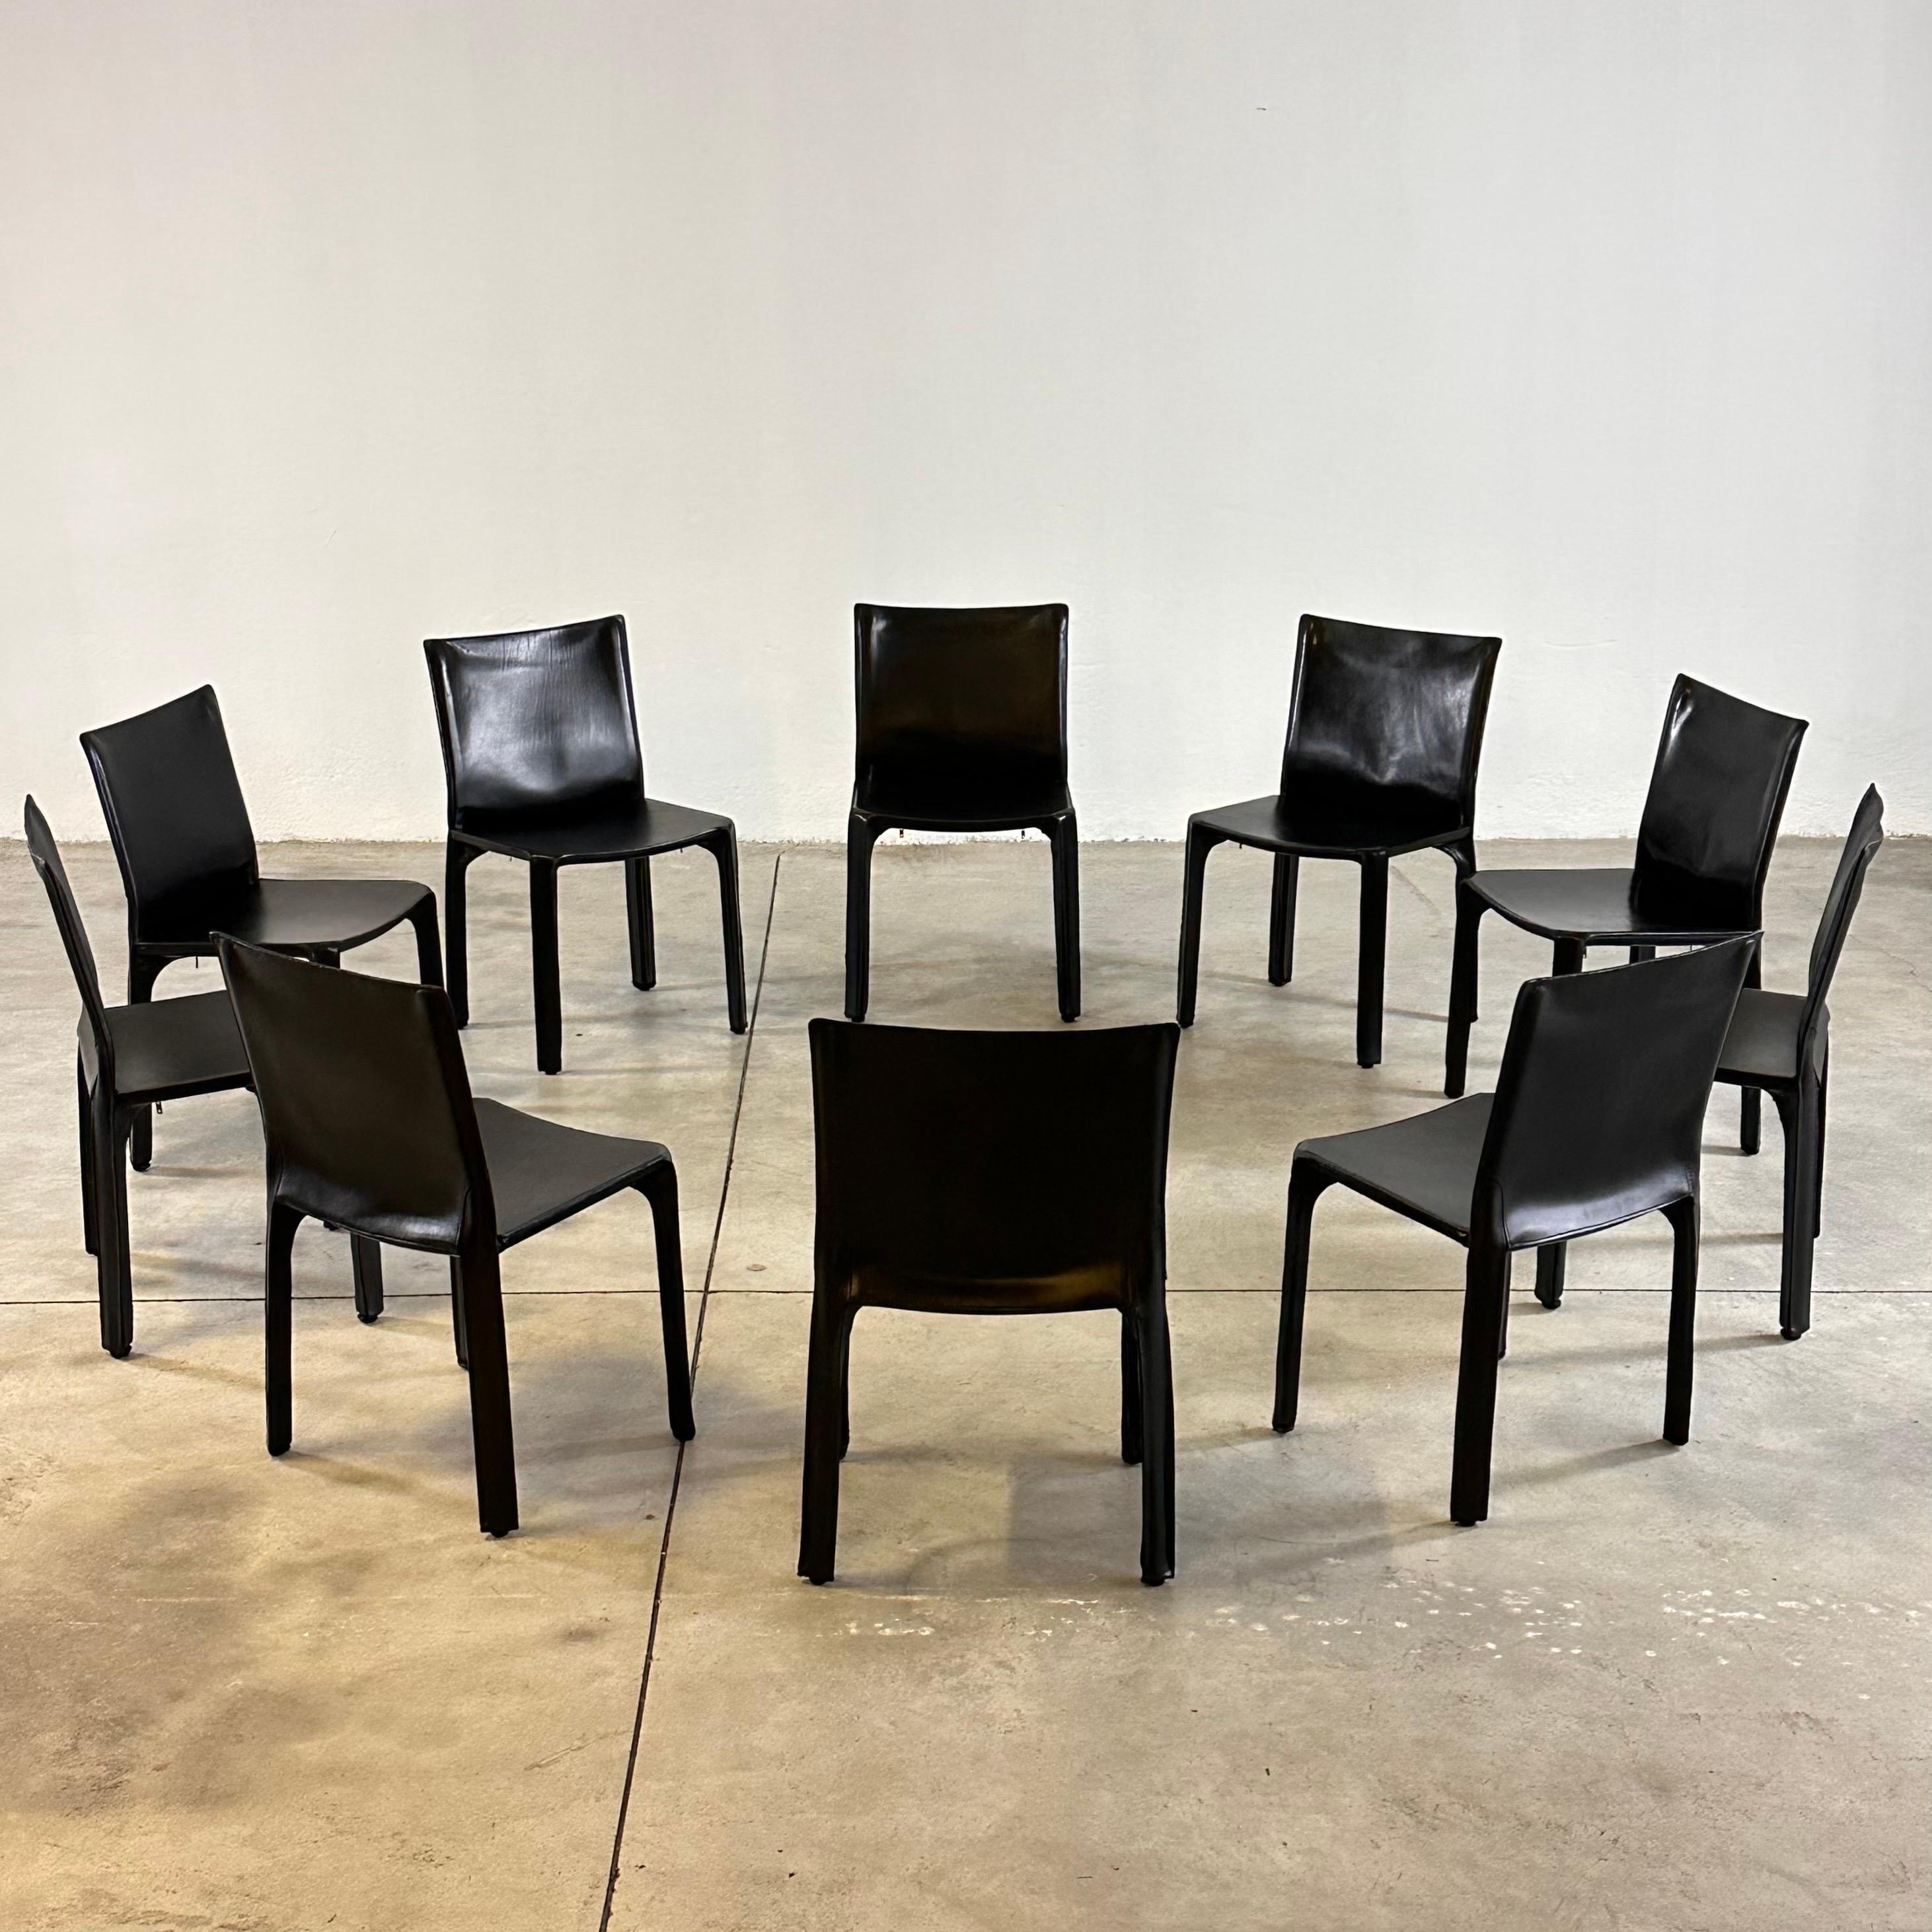 A set of Ten Italian design icons in black saddle leather.

When first produced in 1977, the CAB was the first chair to feature a free-standing leather structure, inspired by how human skin fits over our skeleton. The leather upholstery is